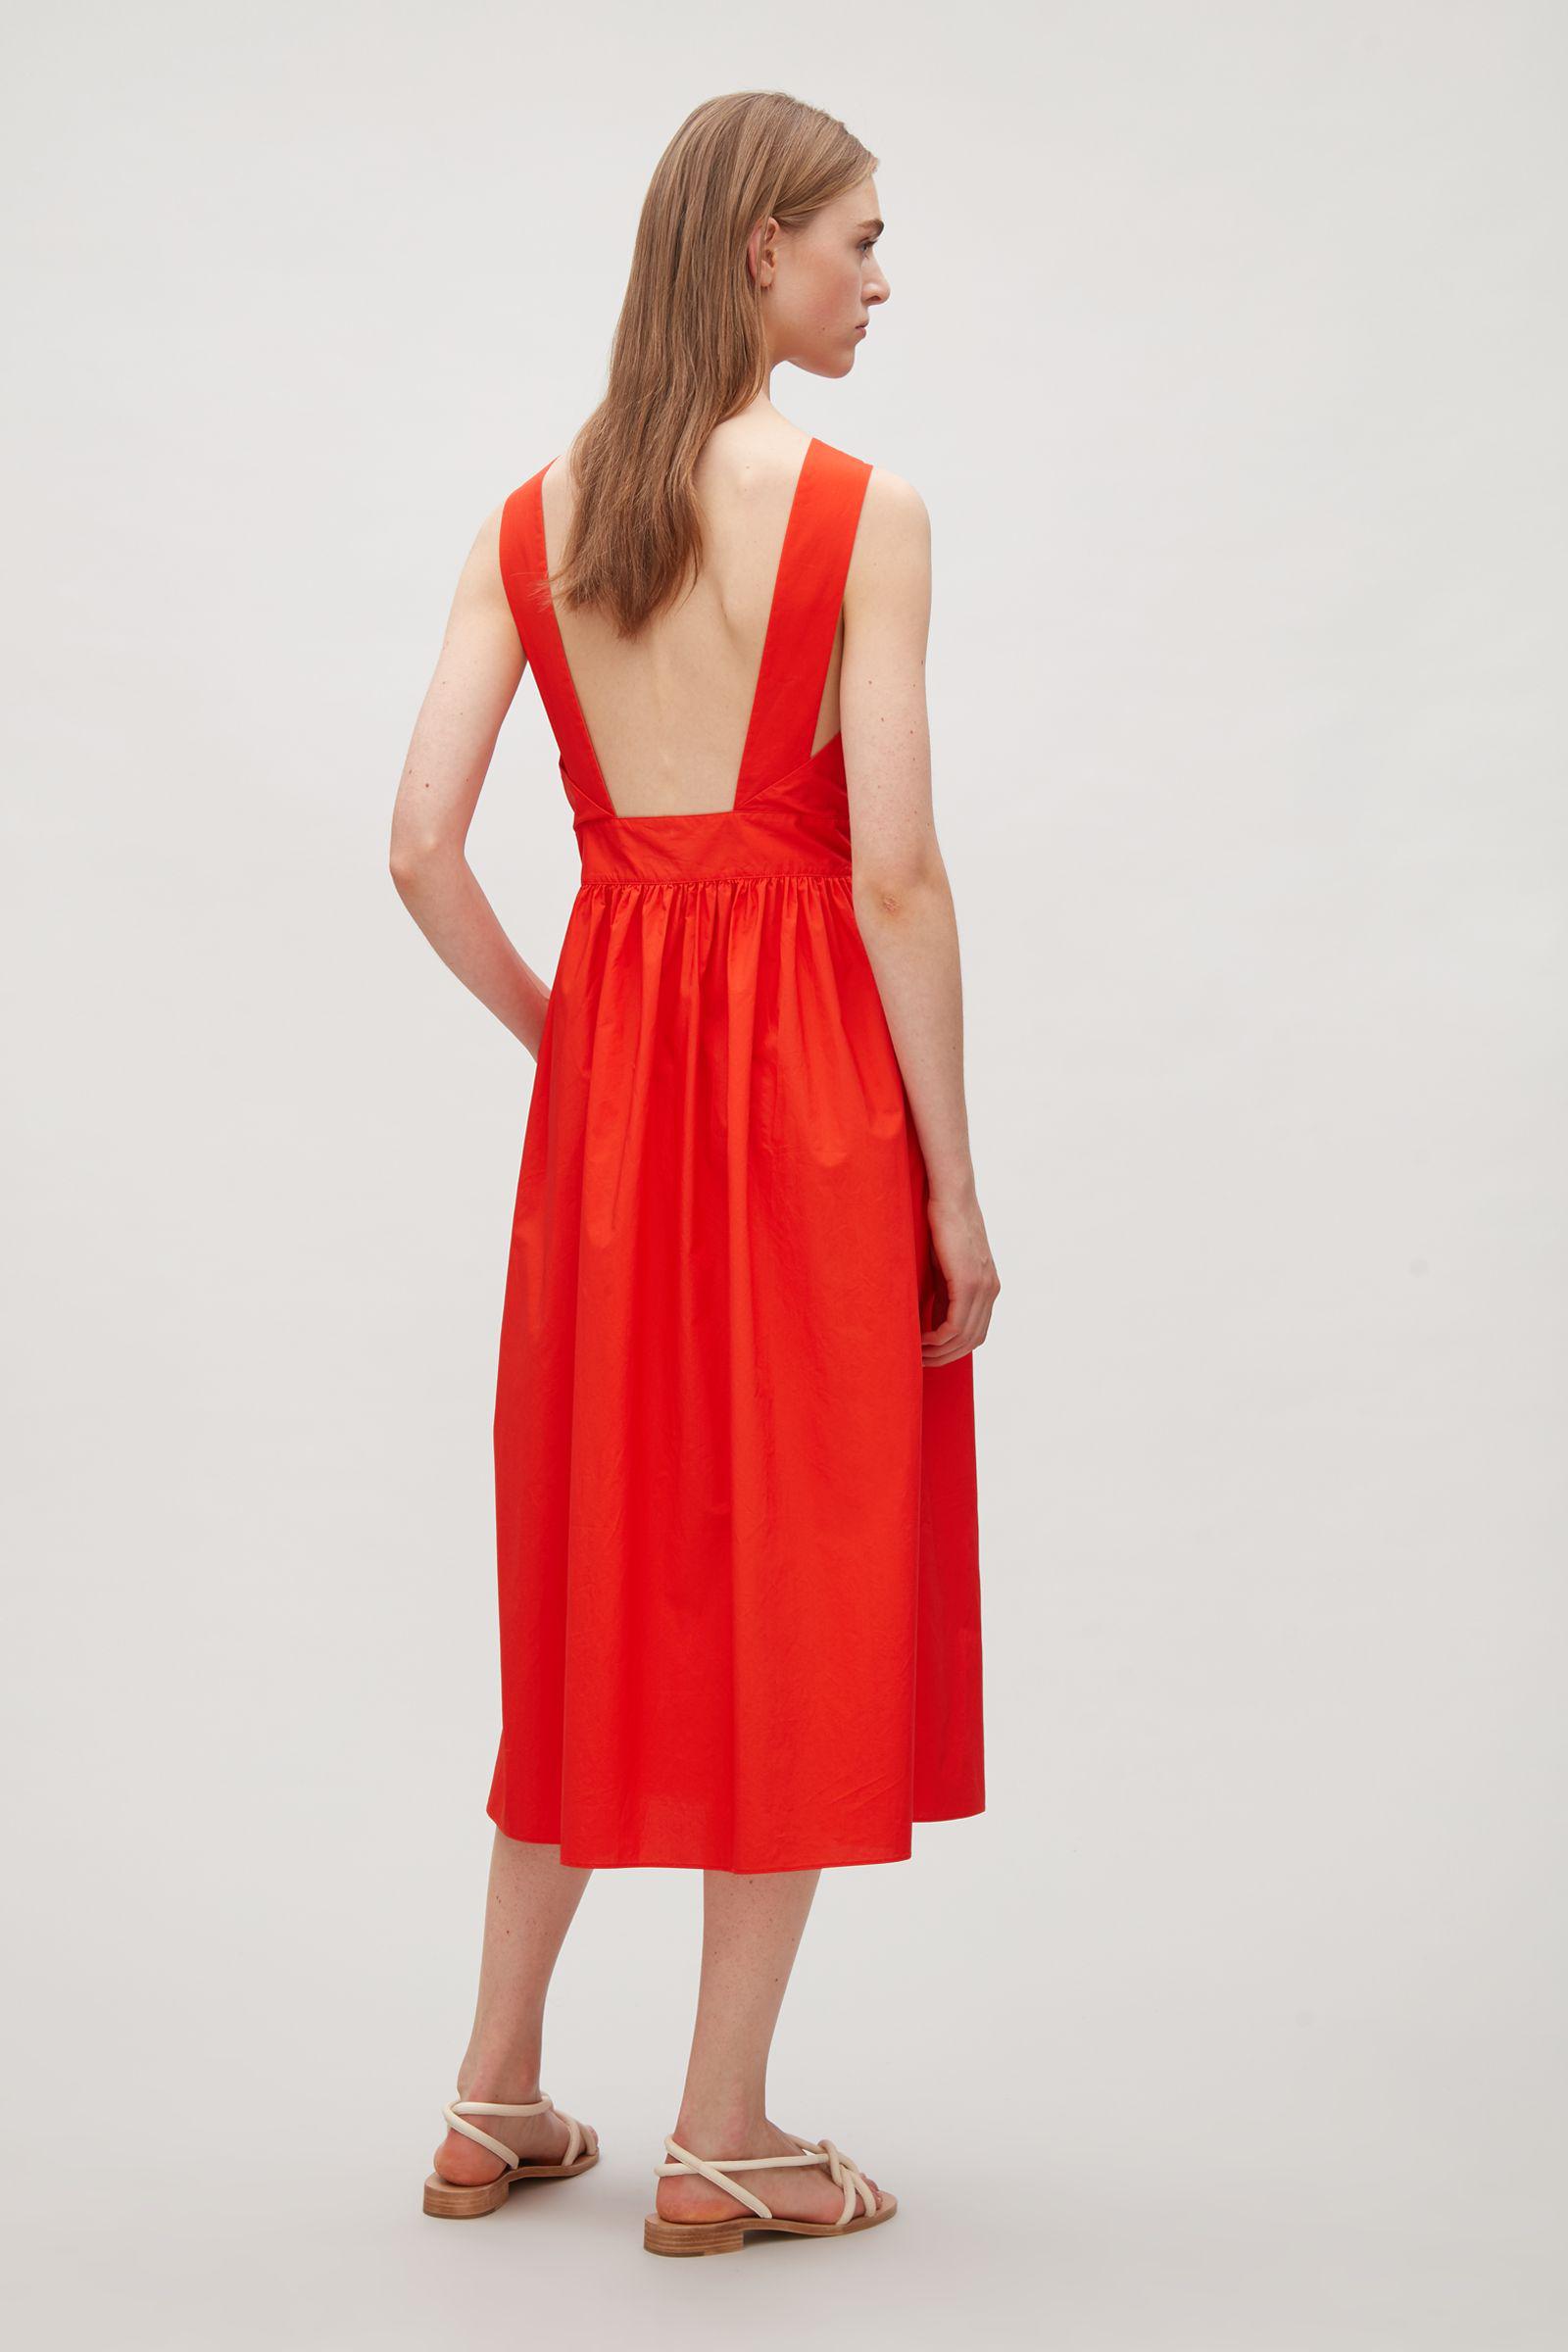 COS Cotton Shoulder-strap Dress in Red - Lyst